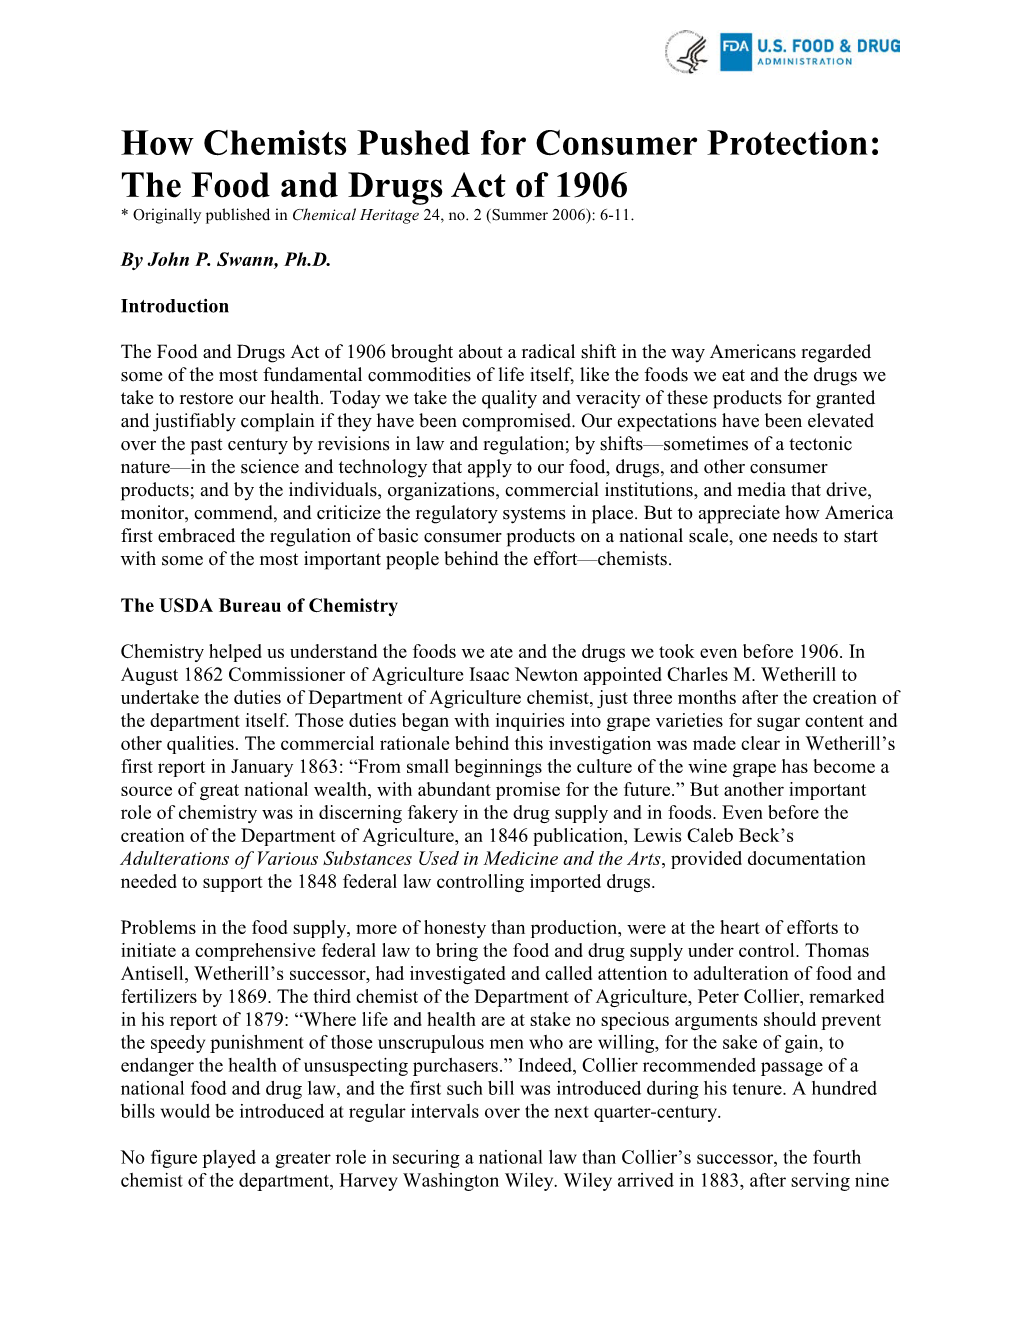 How Chemists Pushed for Consumer Protection:The Food and Drugs Act